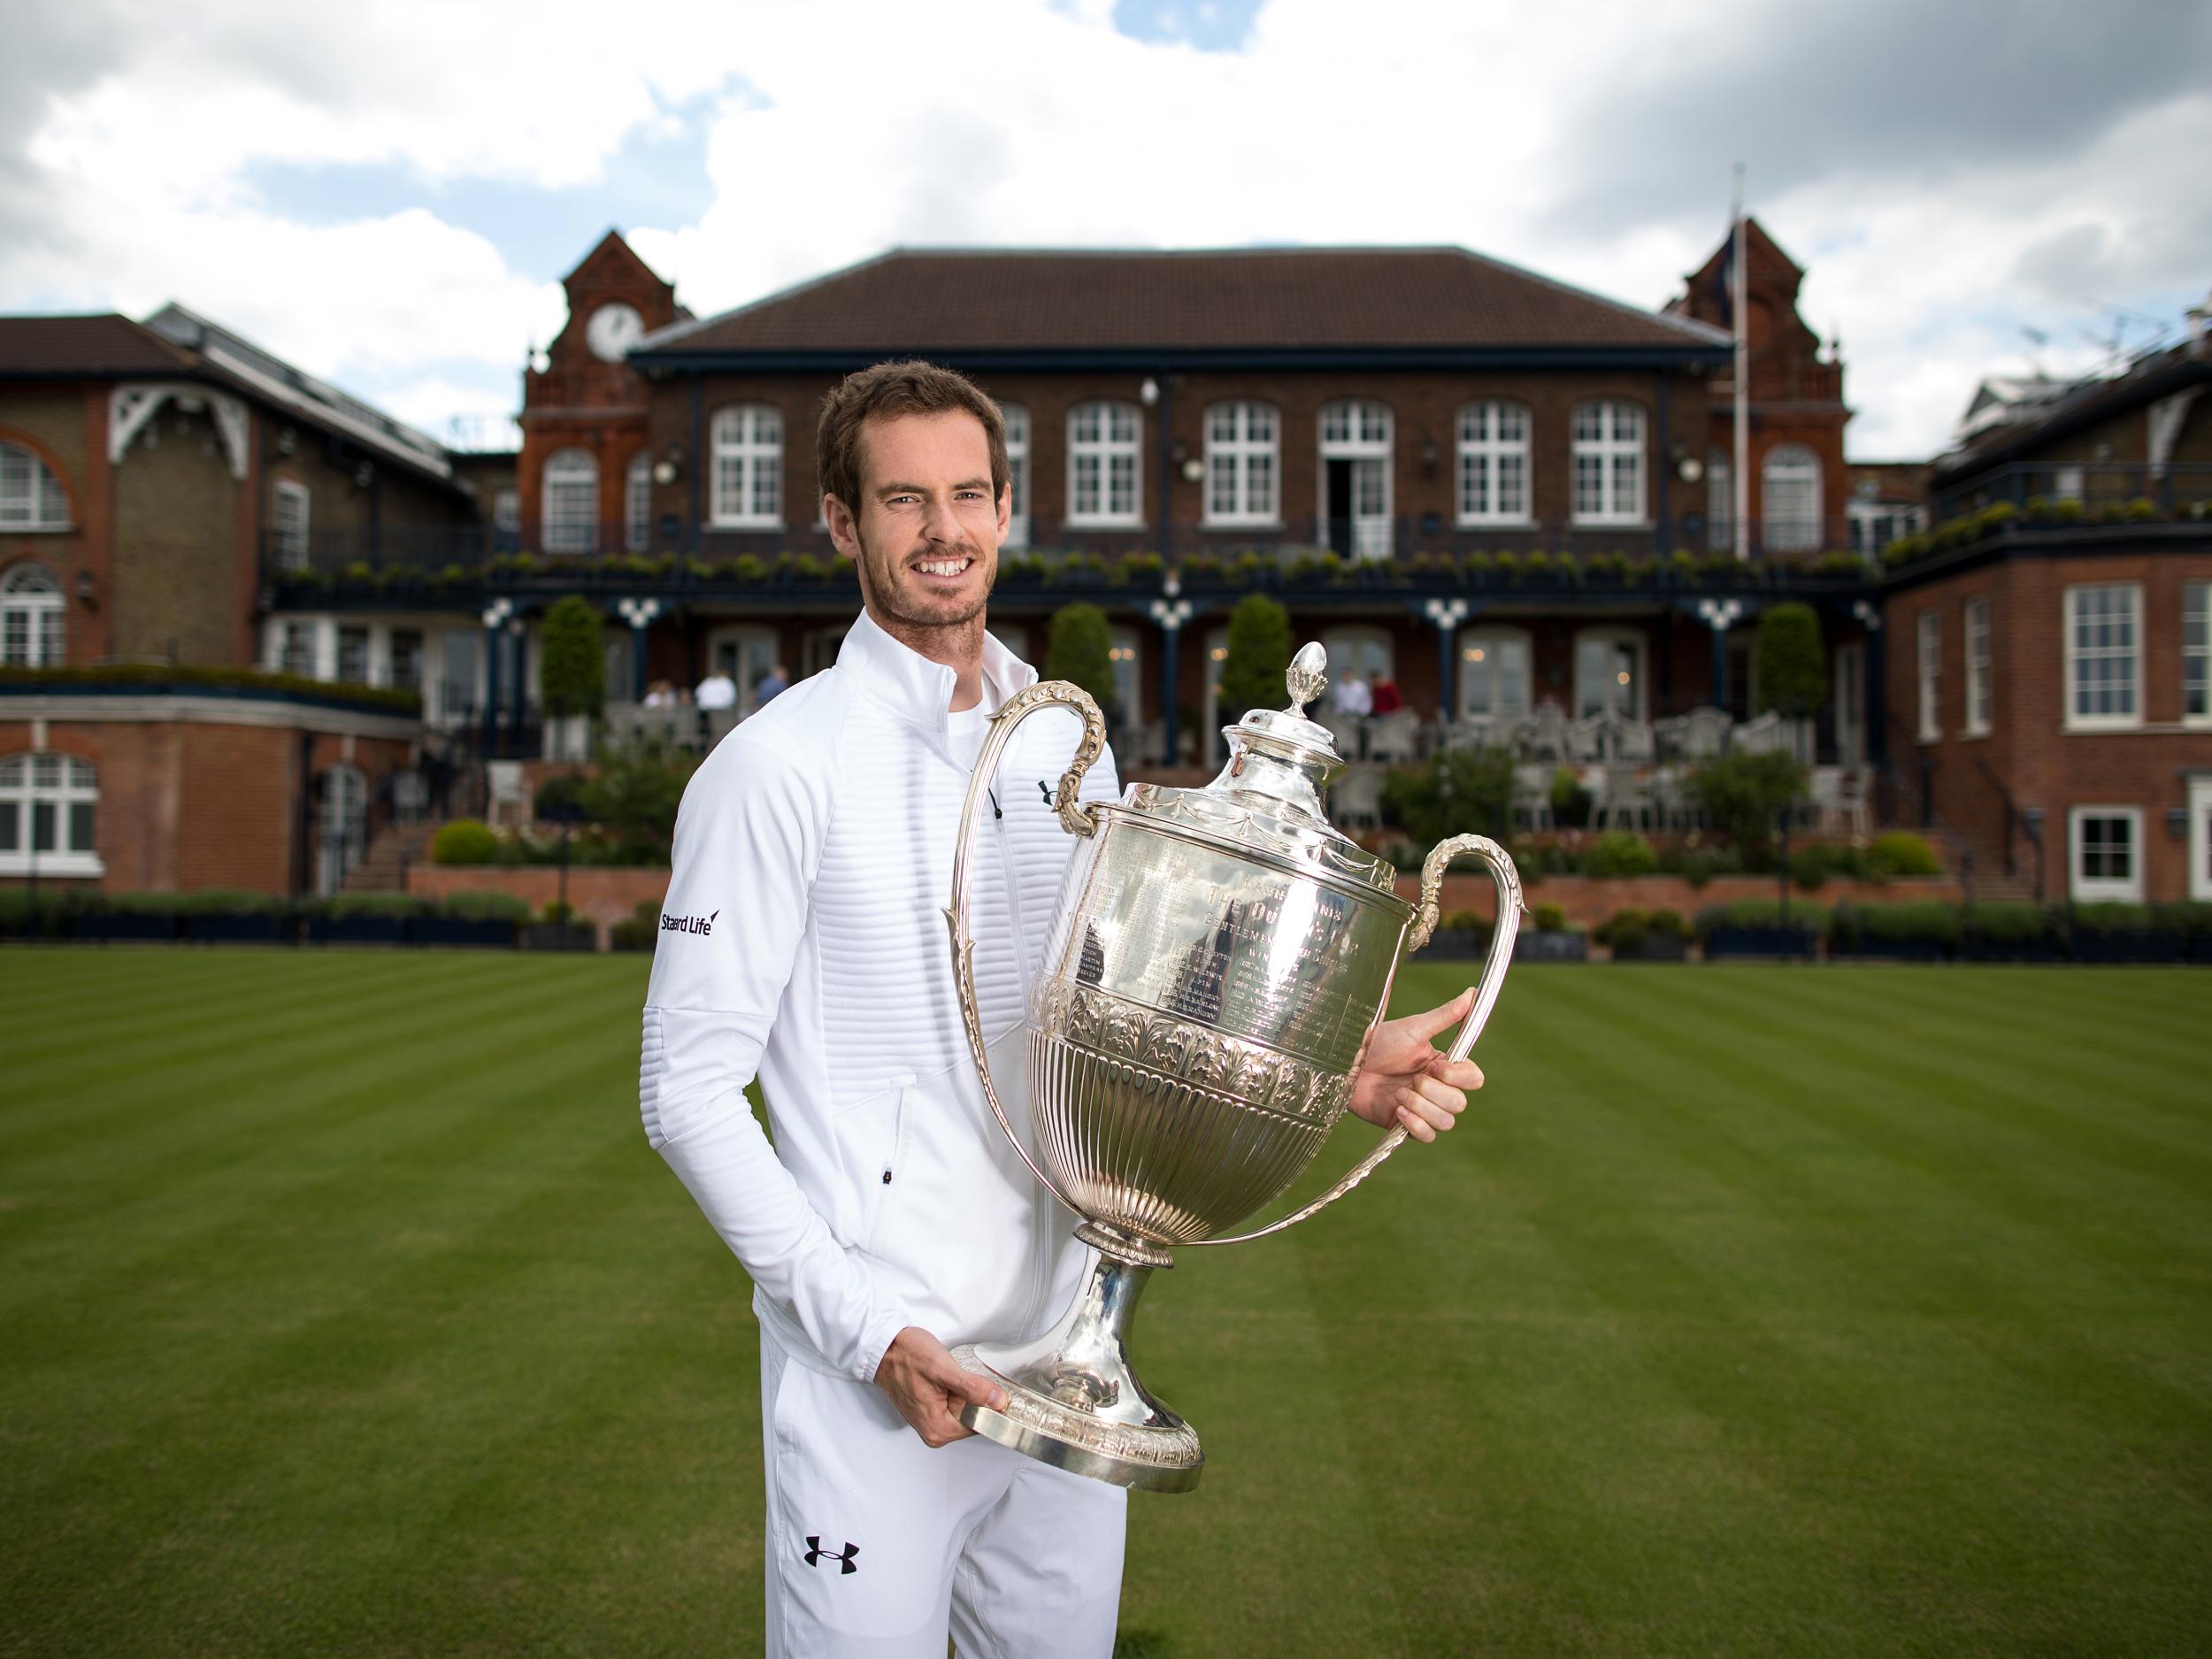 Murray is defending two grass court titles